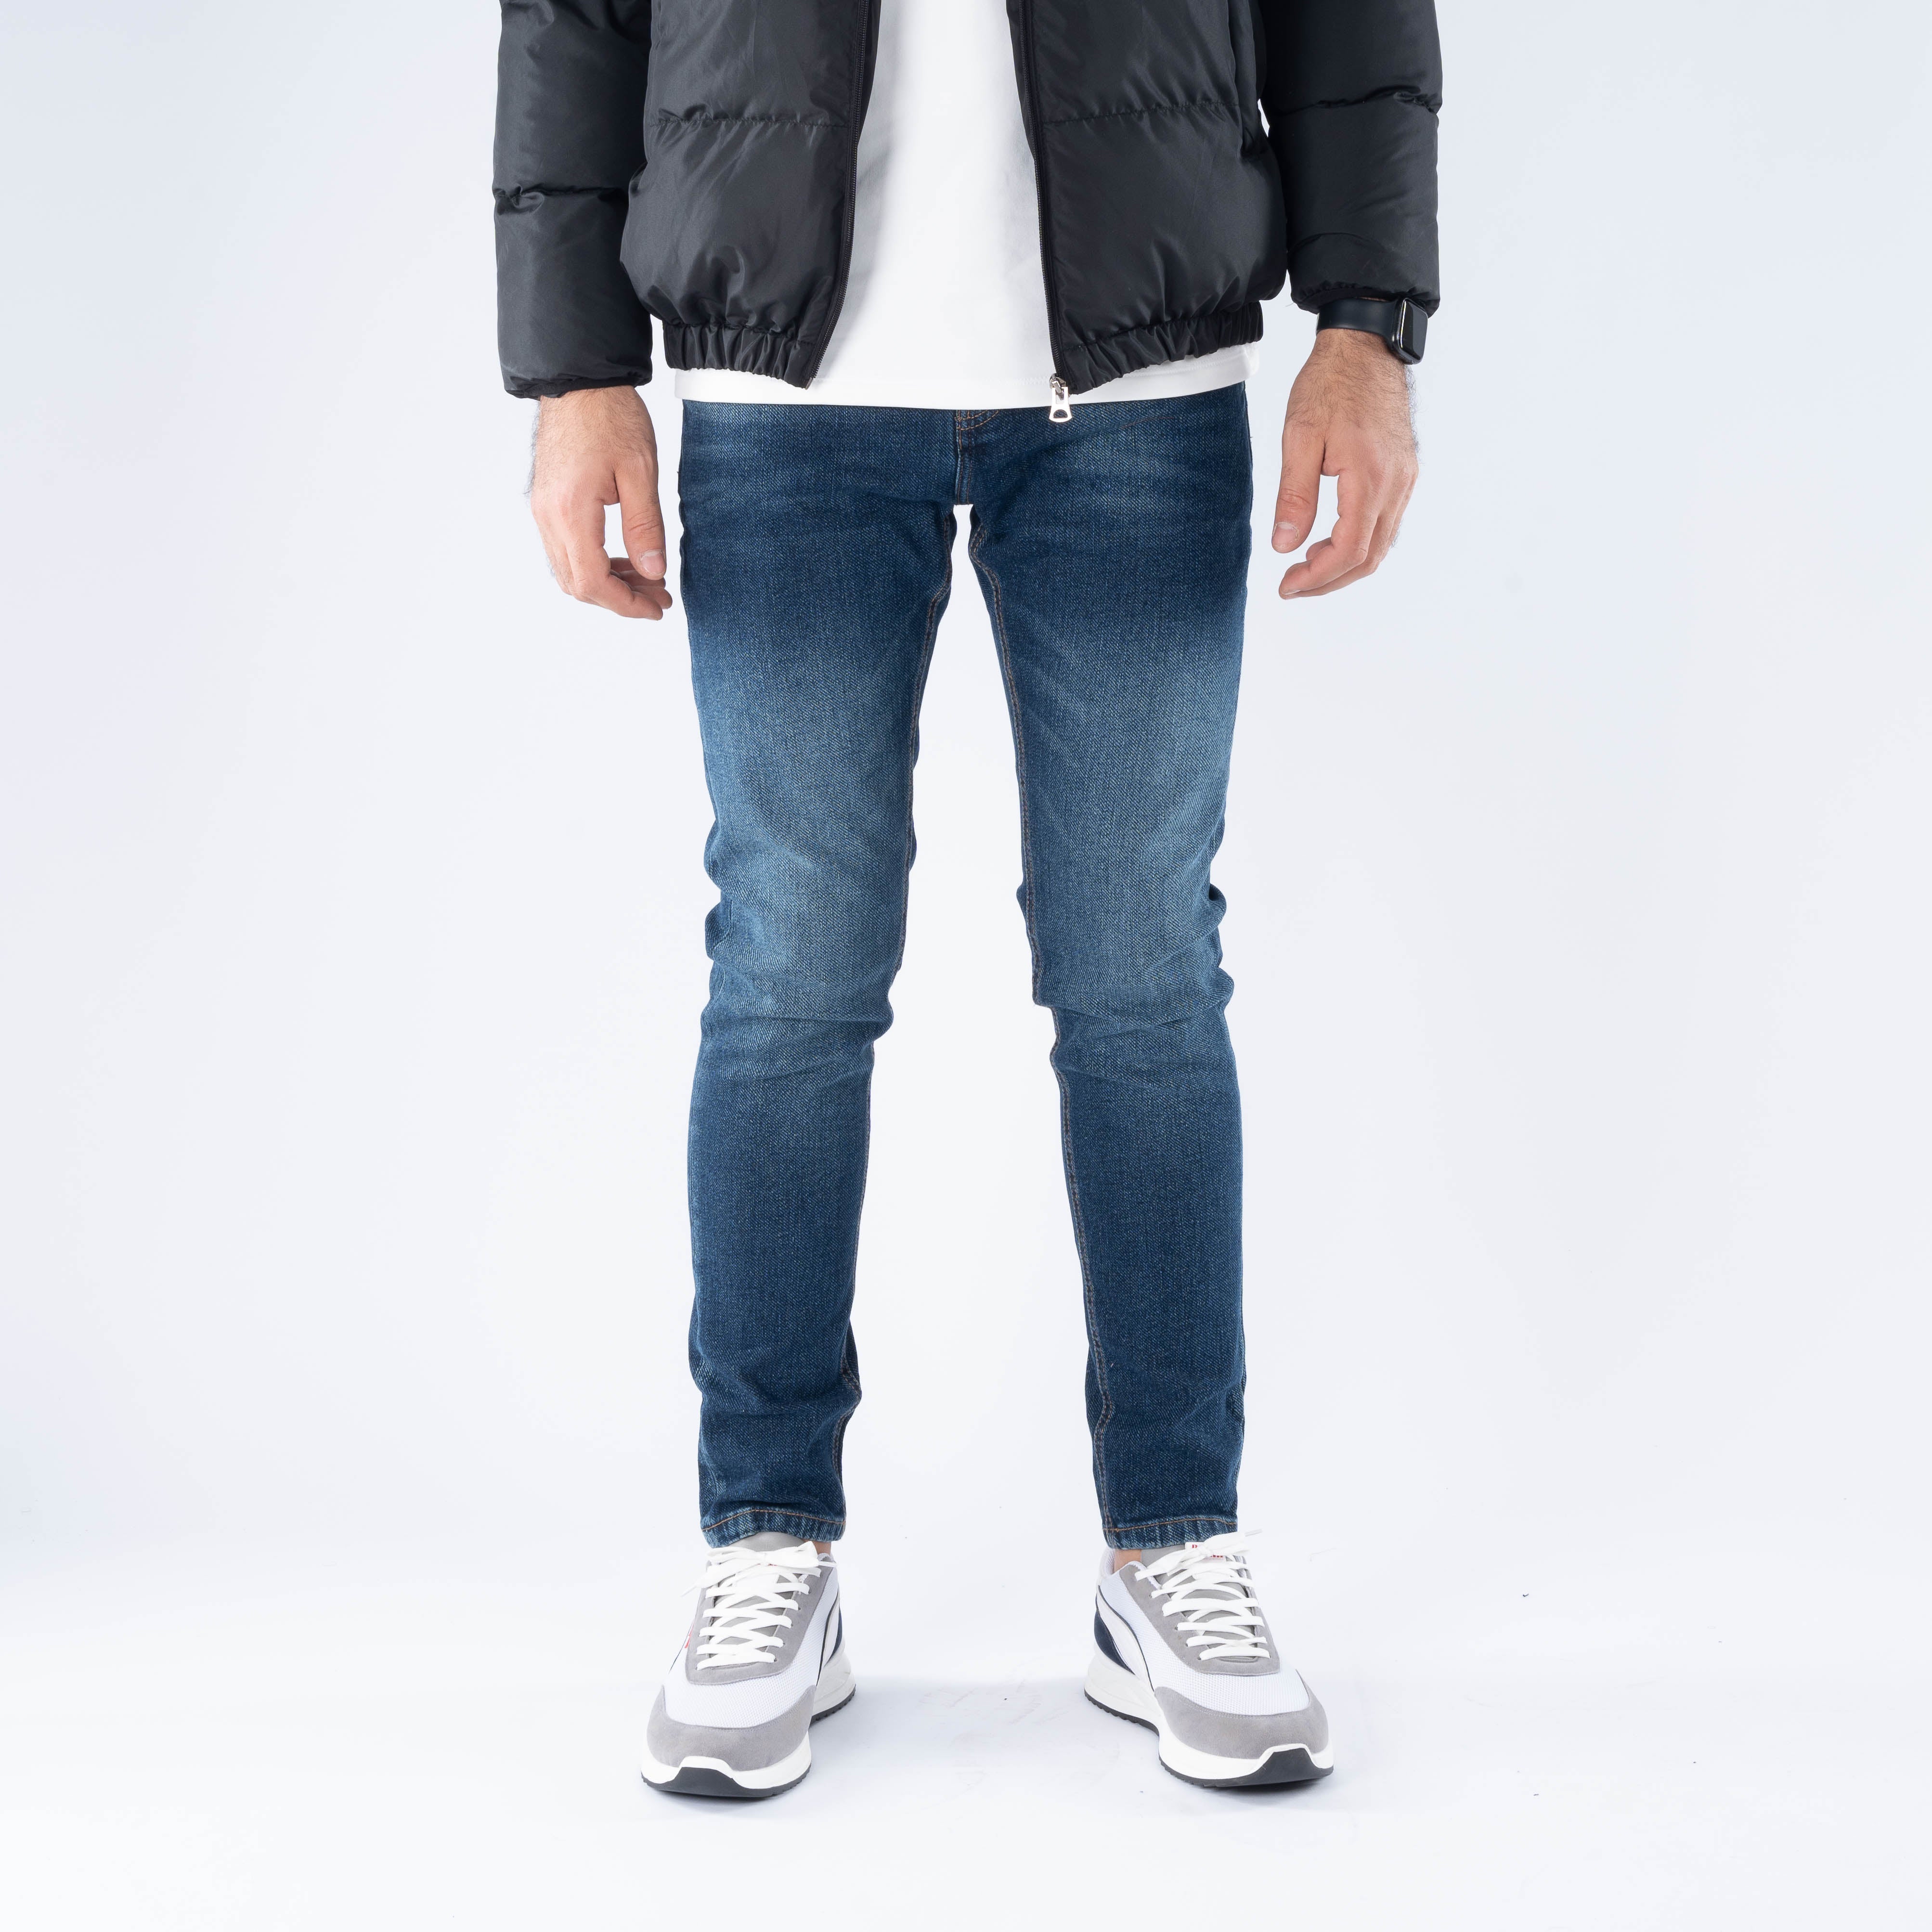 Best Leather Jacket | 2019 | Leather jacket outfit men, Leather jacket men, Leather  jacket